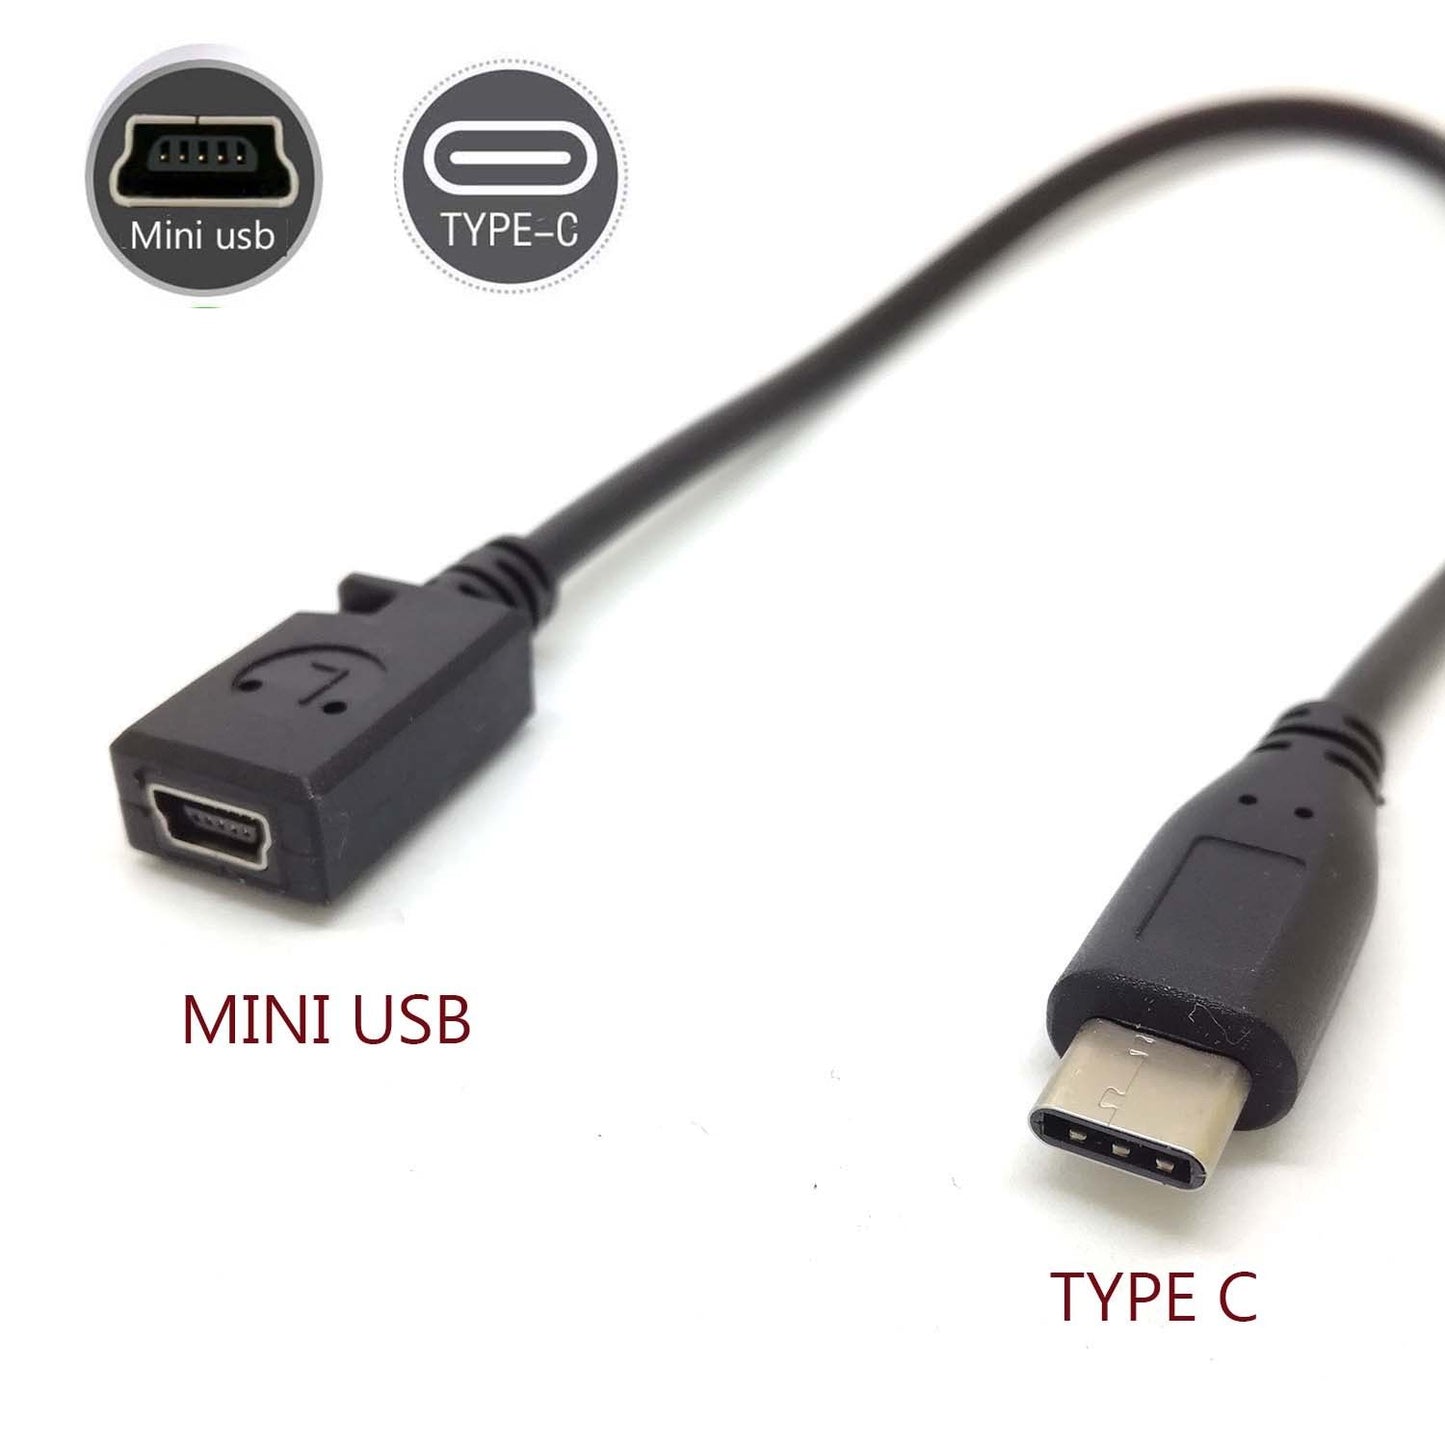 Type C USB 3.1 Male to 5pin Mini USB Female Charging Data sync Cable Cord Adapter